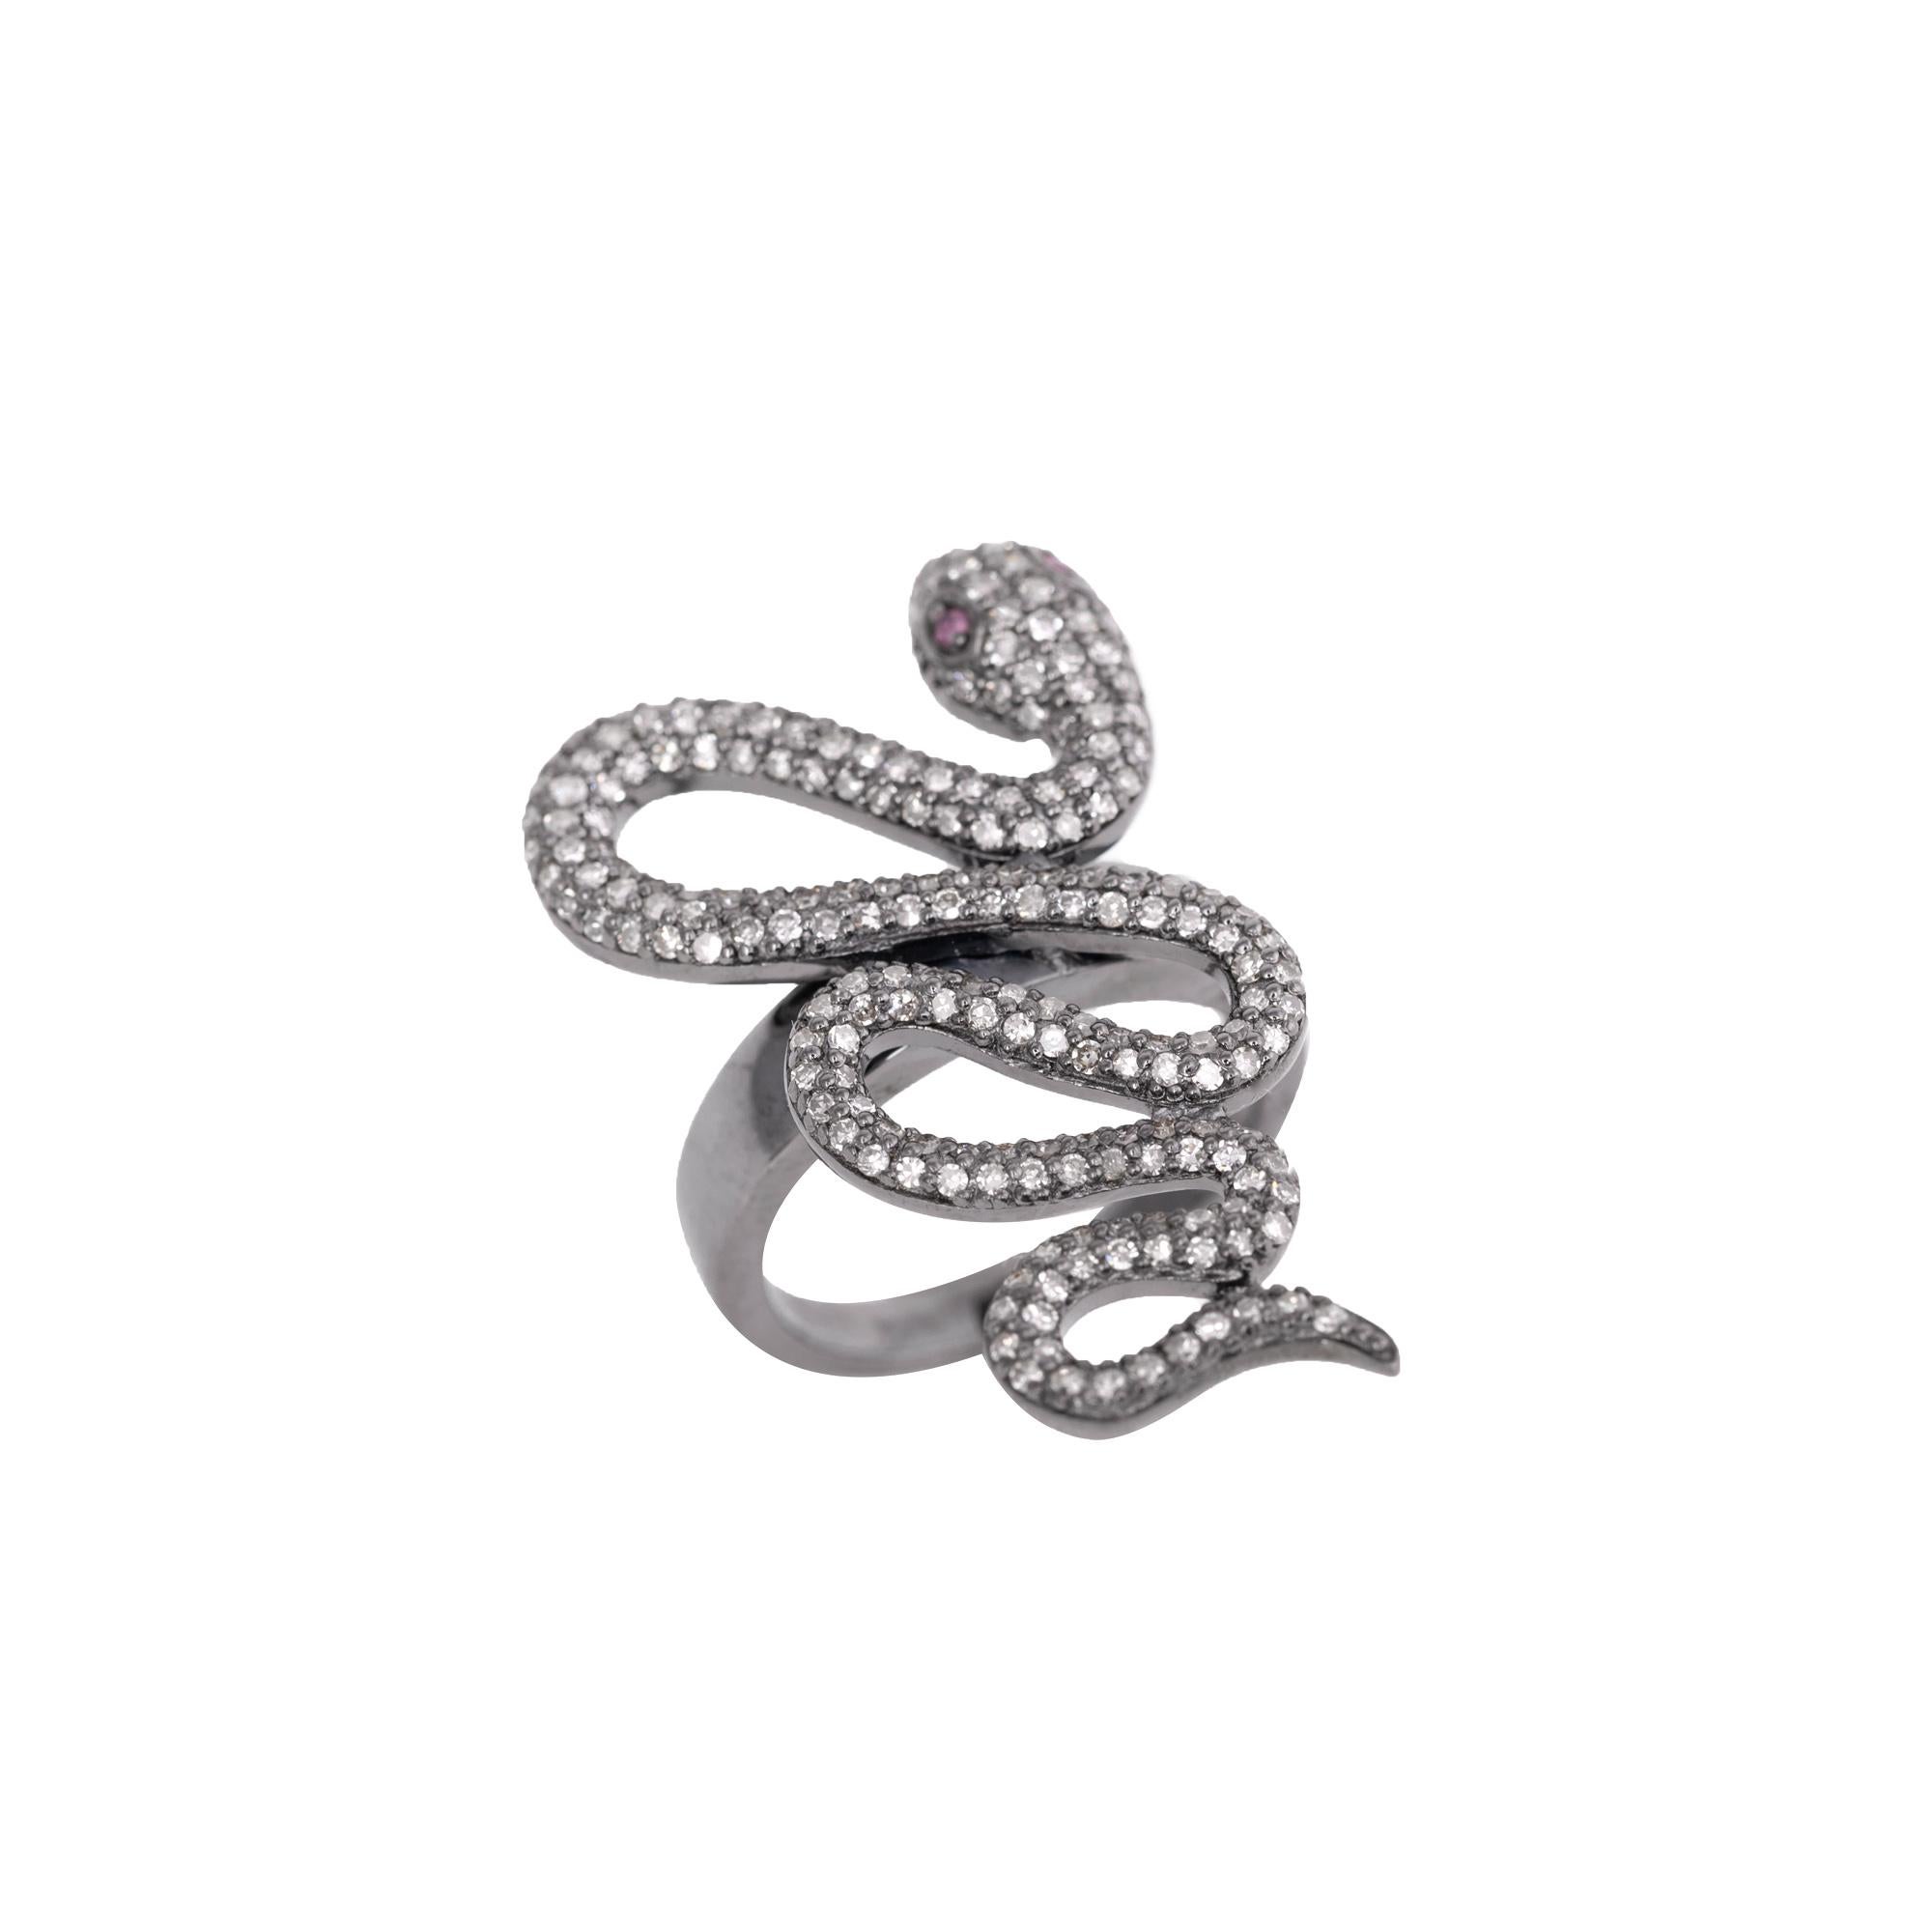 Contemporary 1.15 Carat Diamond Serpent Snake Ring For Sale